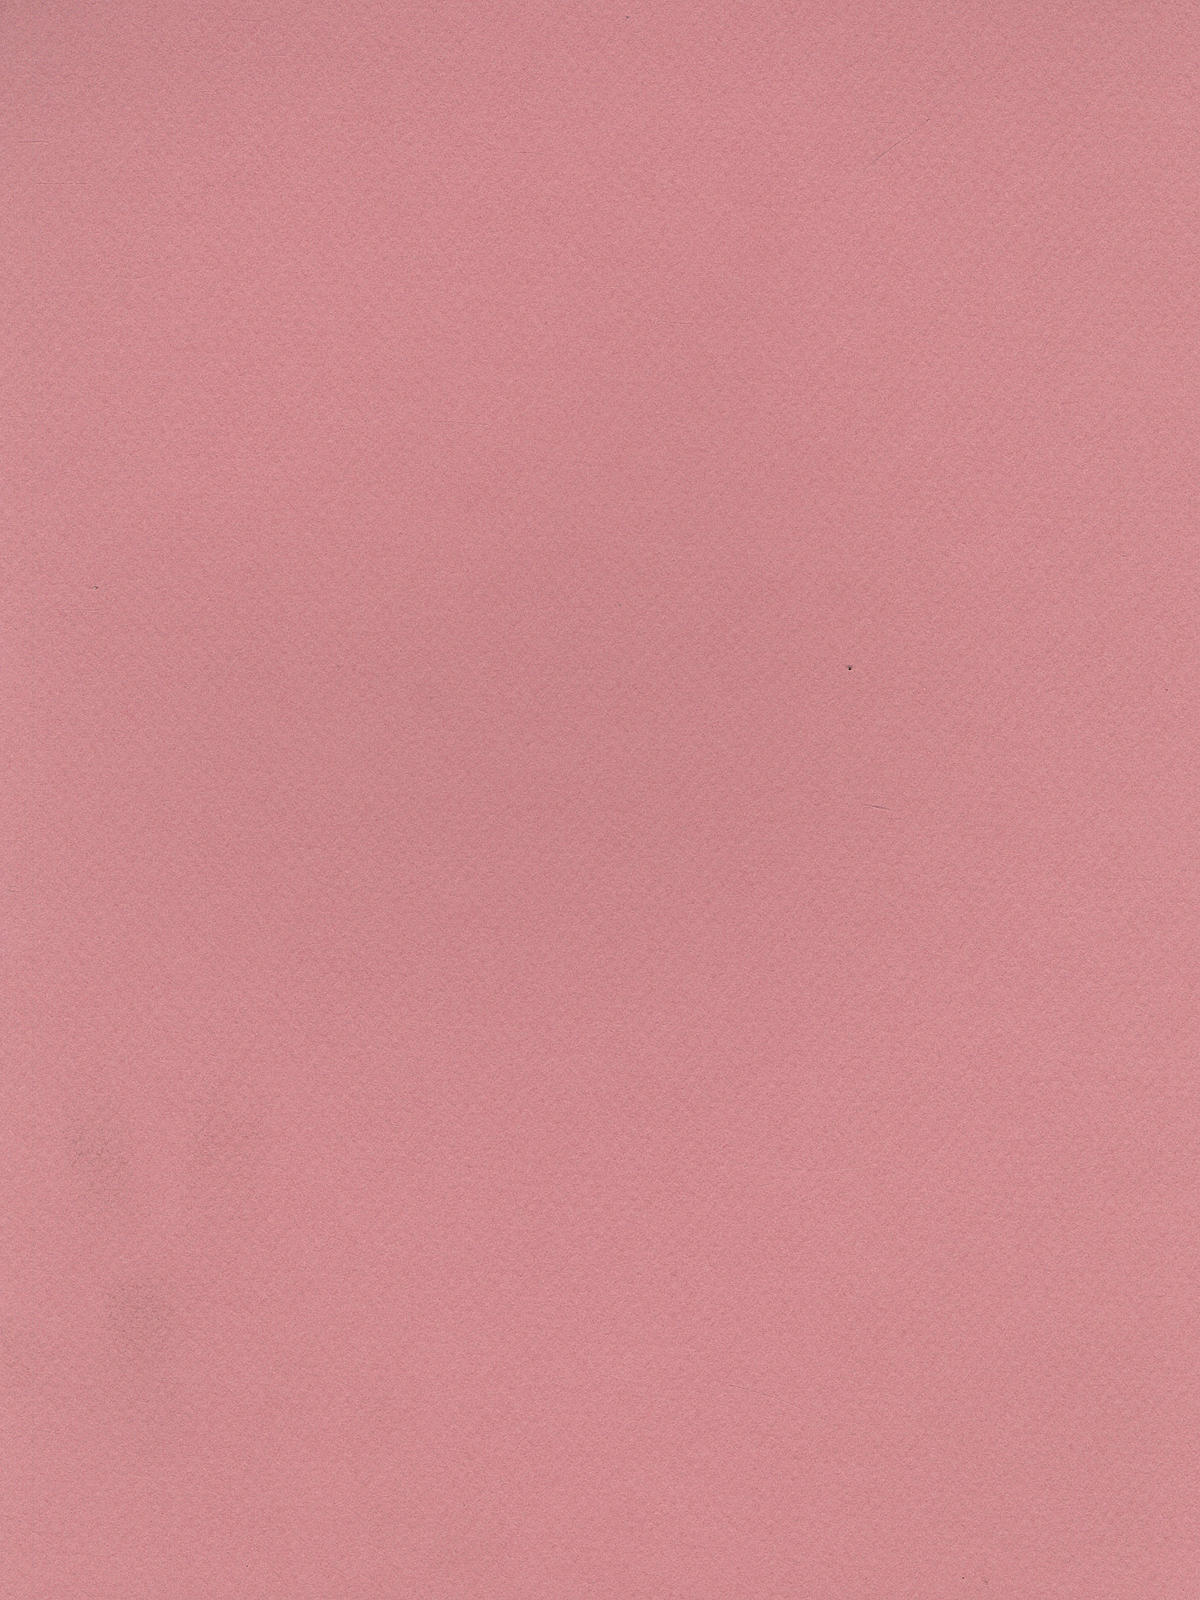 Mi-teintes Tinted Paper Orchid 8.5 In. X 11 In.